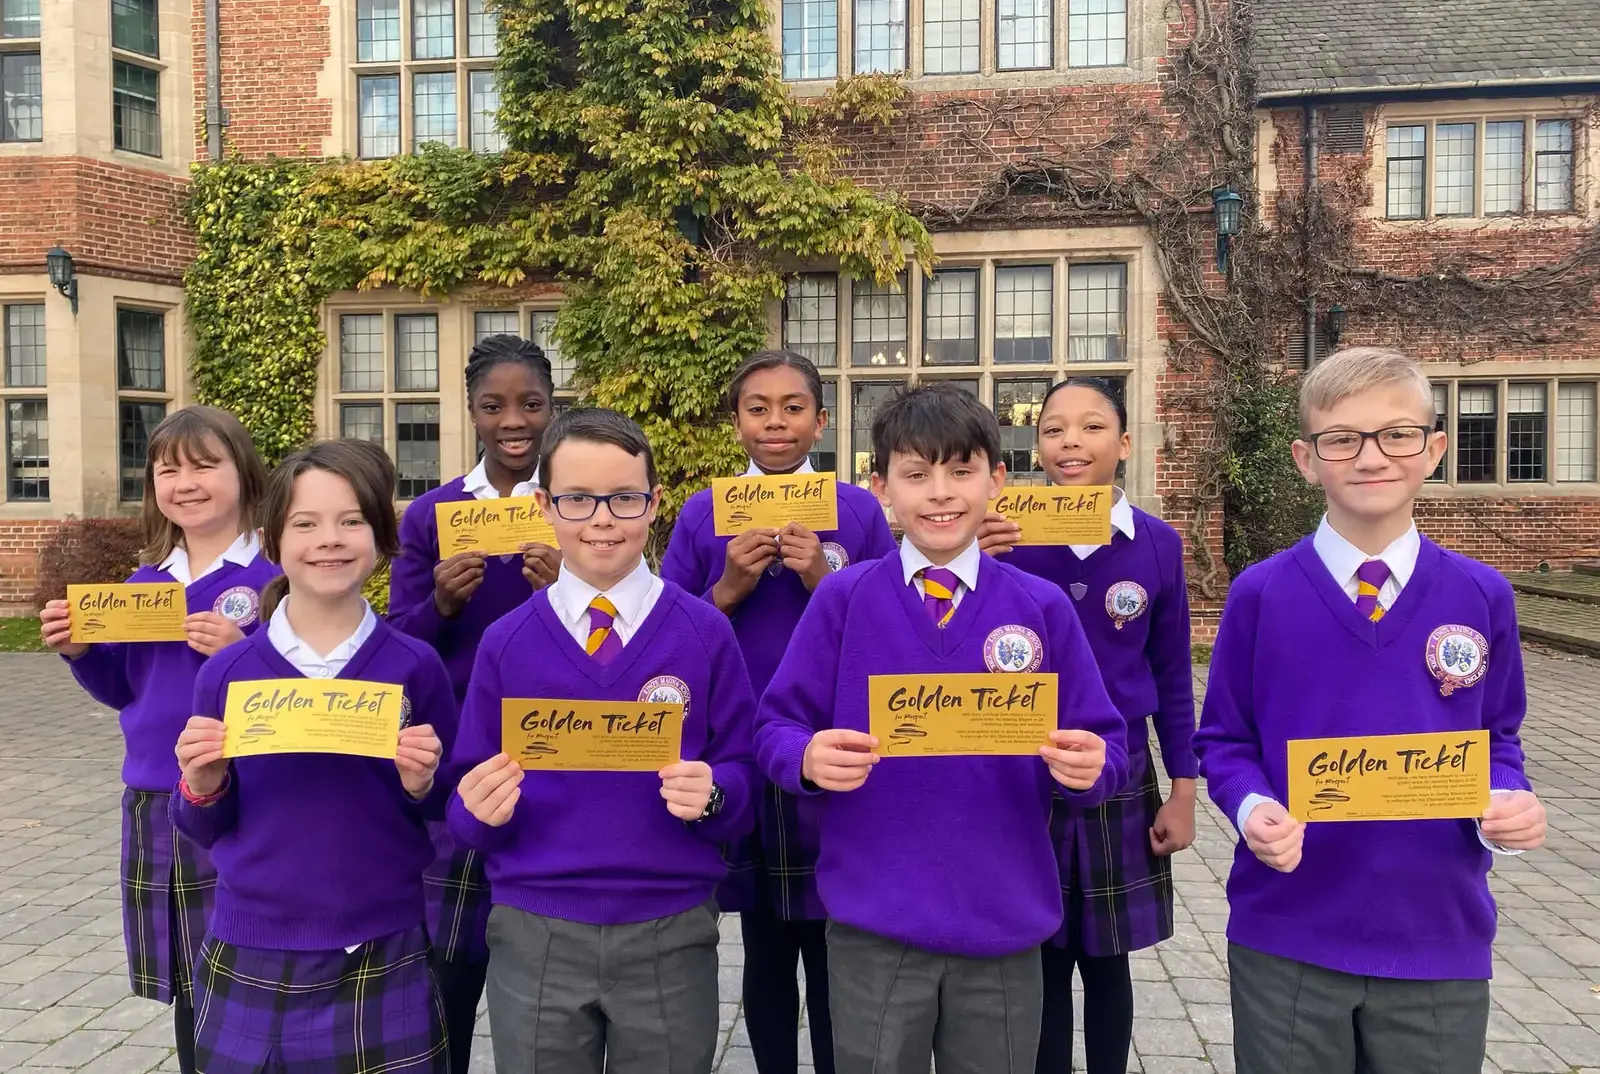 King's Magna pupils with their Golden Tickets